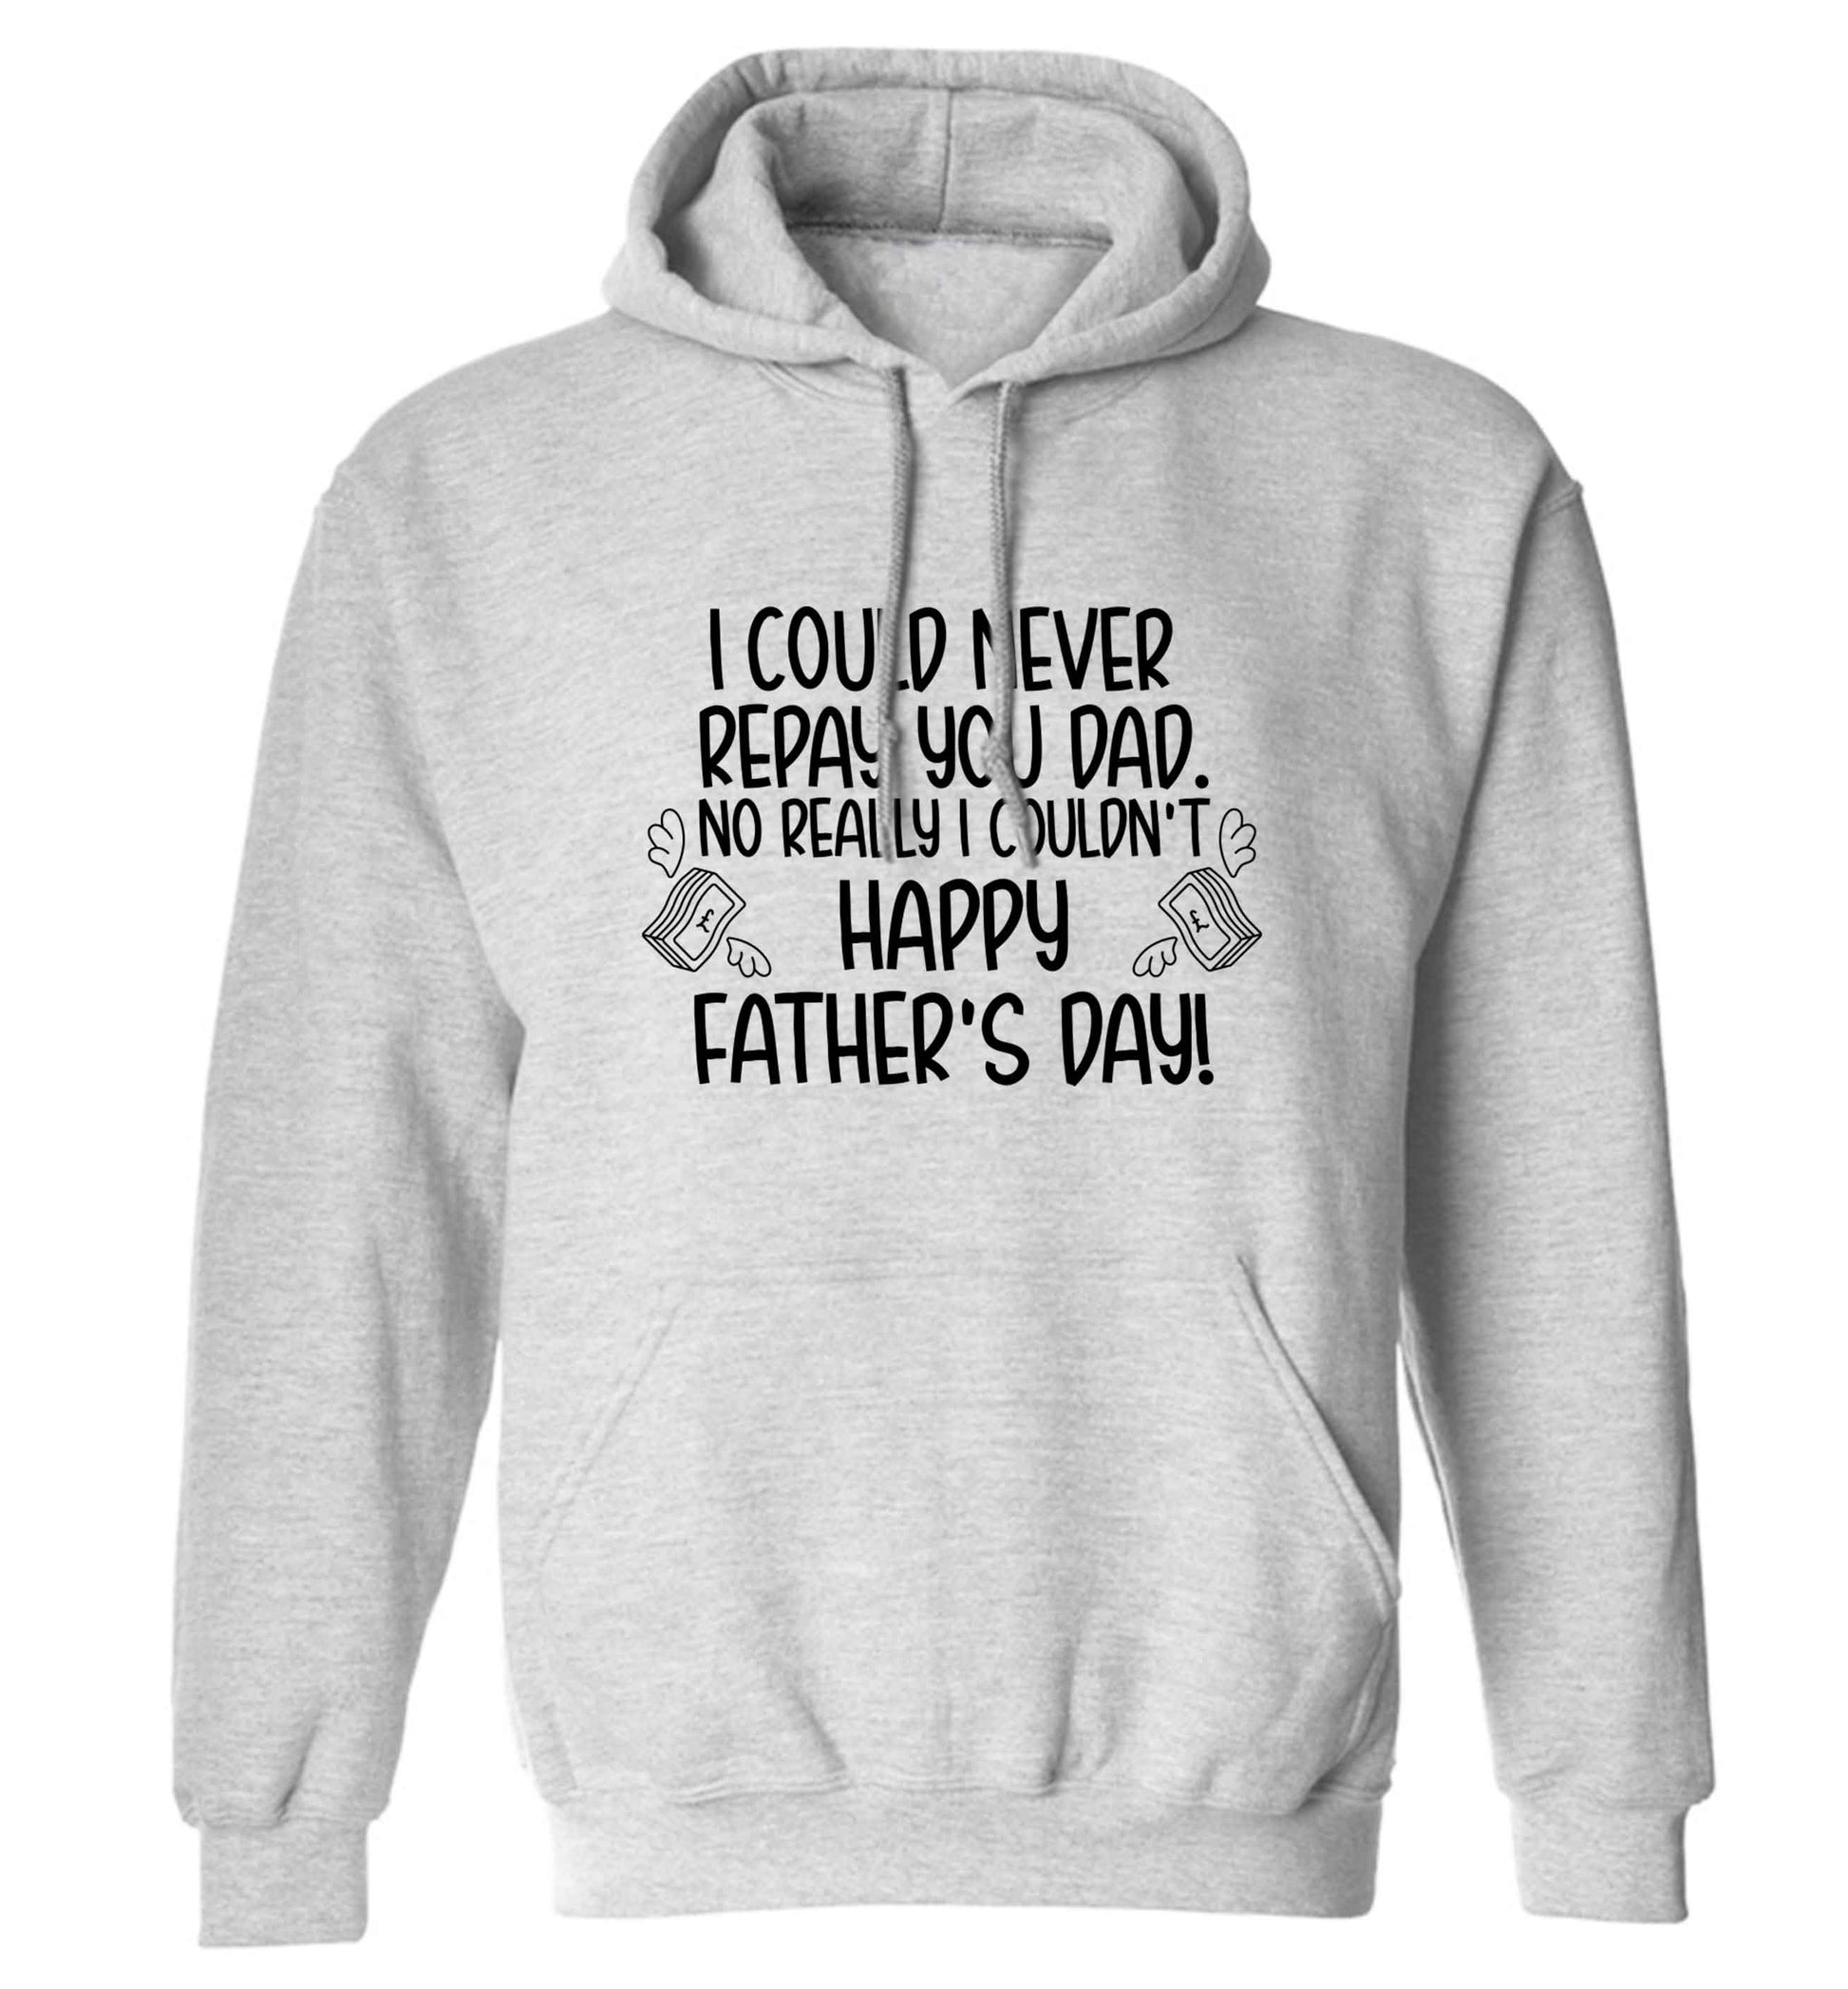 I could never repay you dad. No I really couldn't happy Father's day! adults unisex grey hoodie 2XL